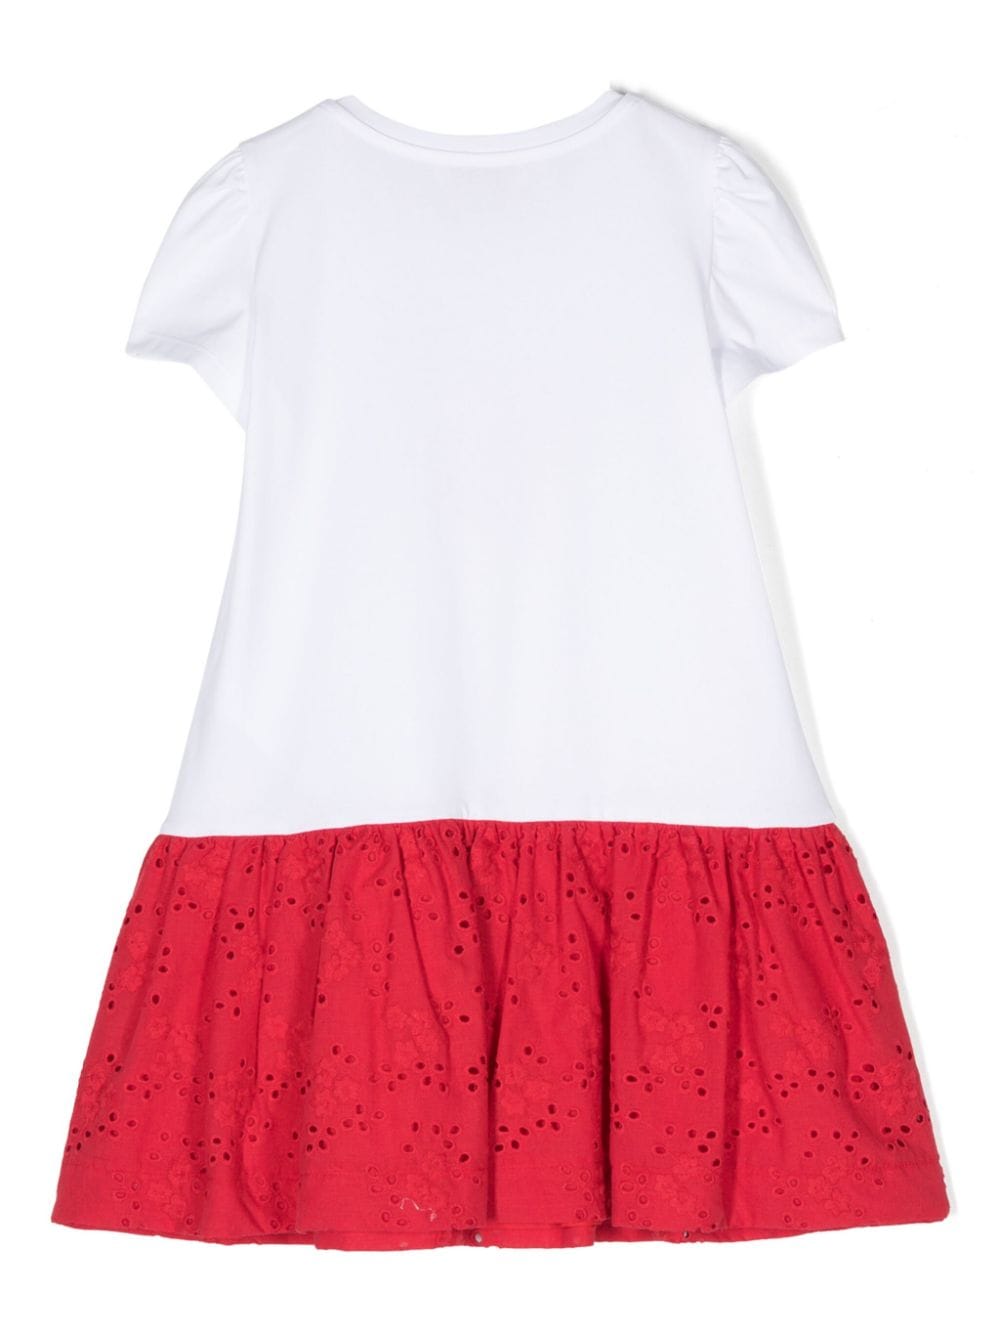 White and red dress for girls with print